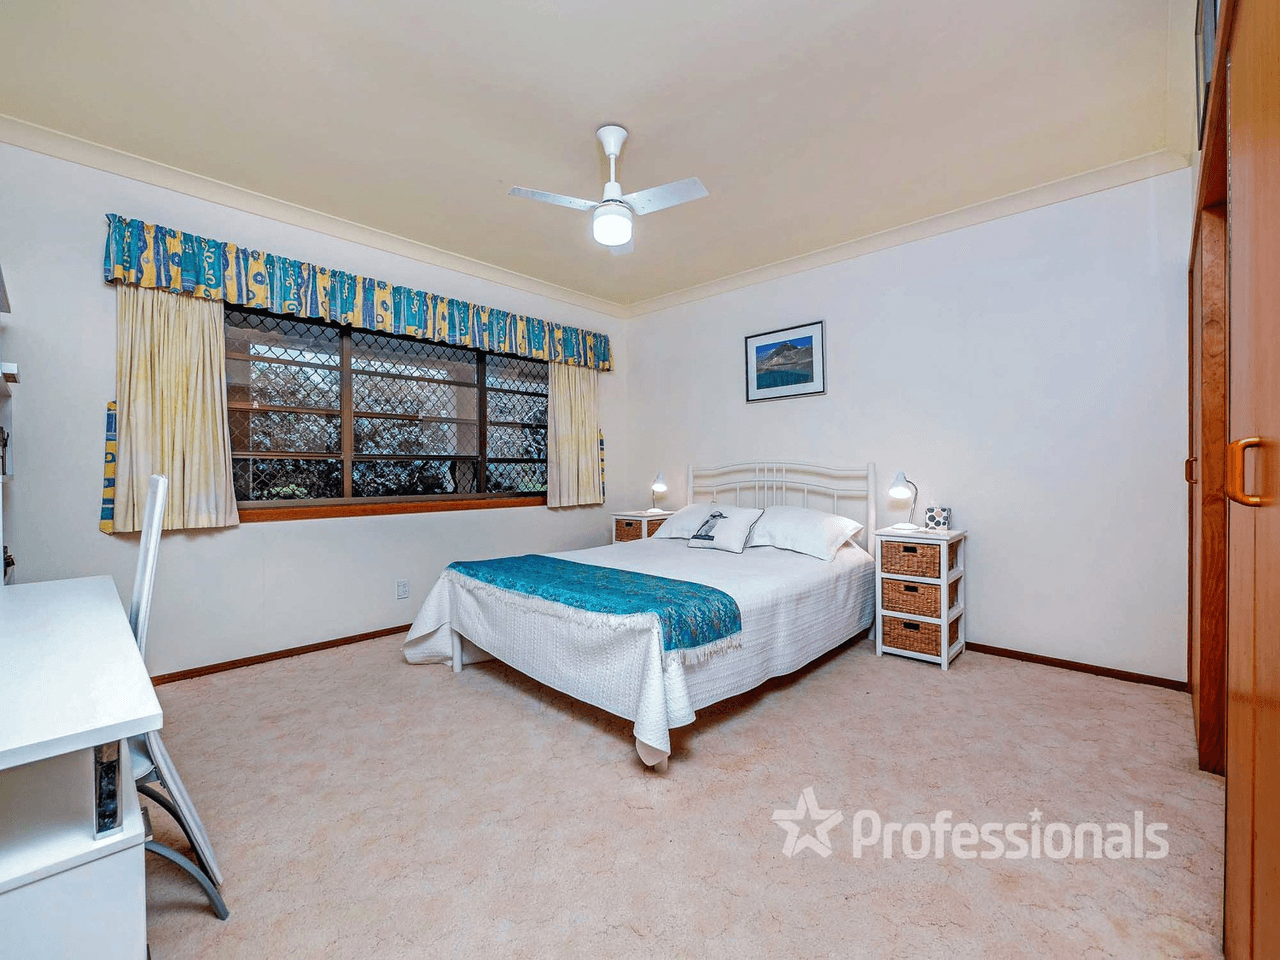 55 Beaumont Drive, East Lismore, NSW 2480